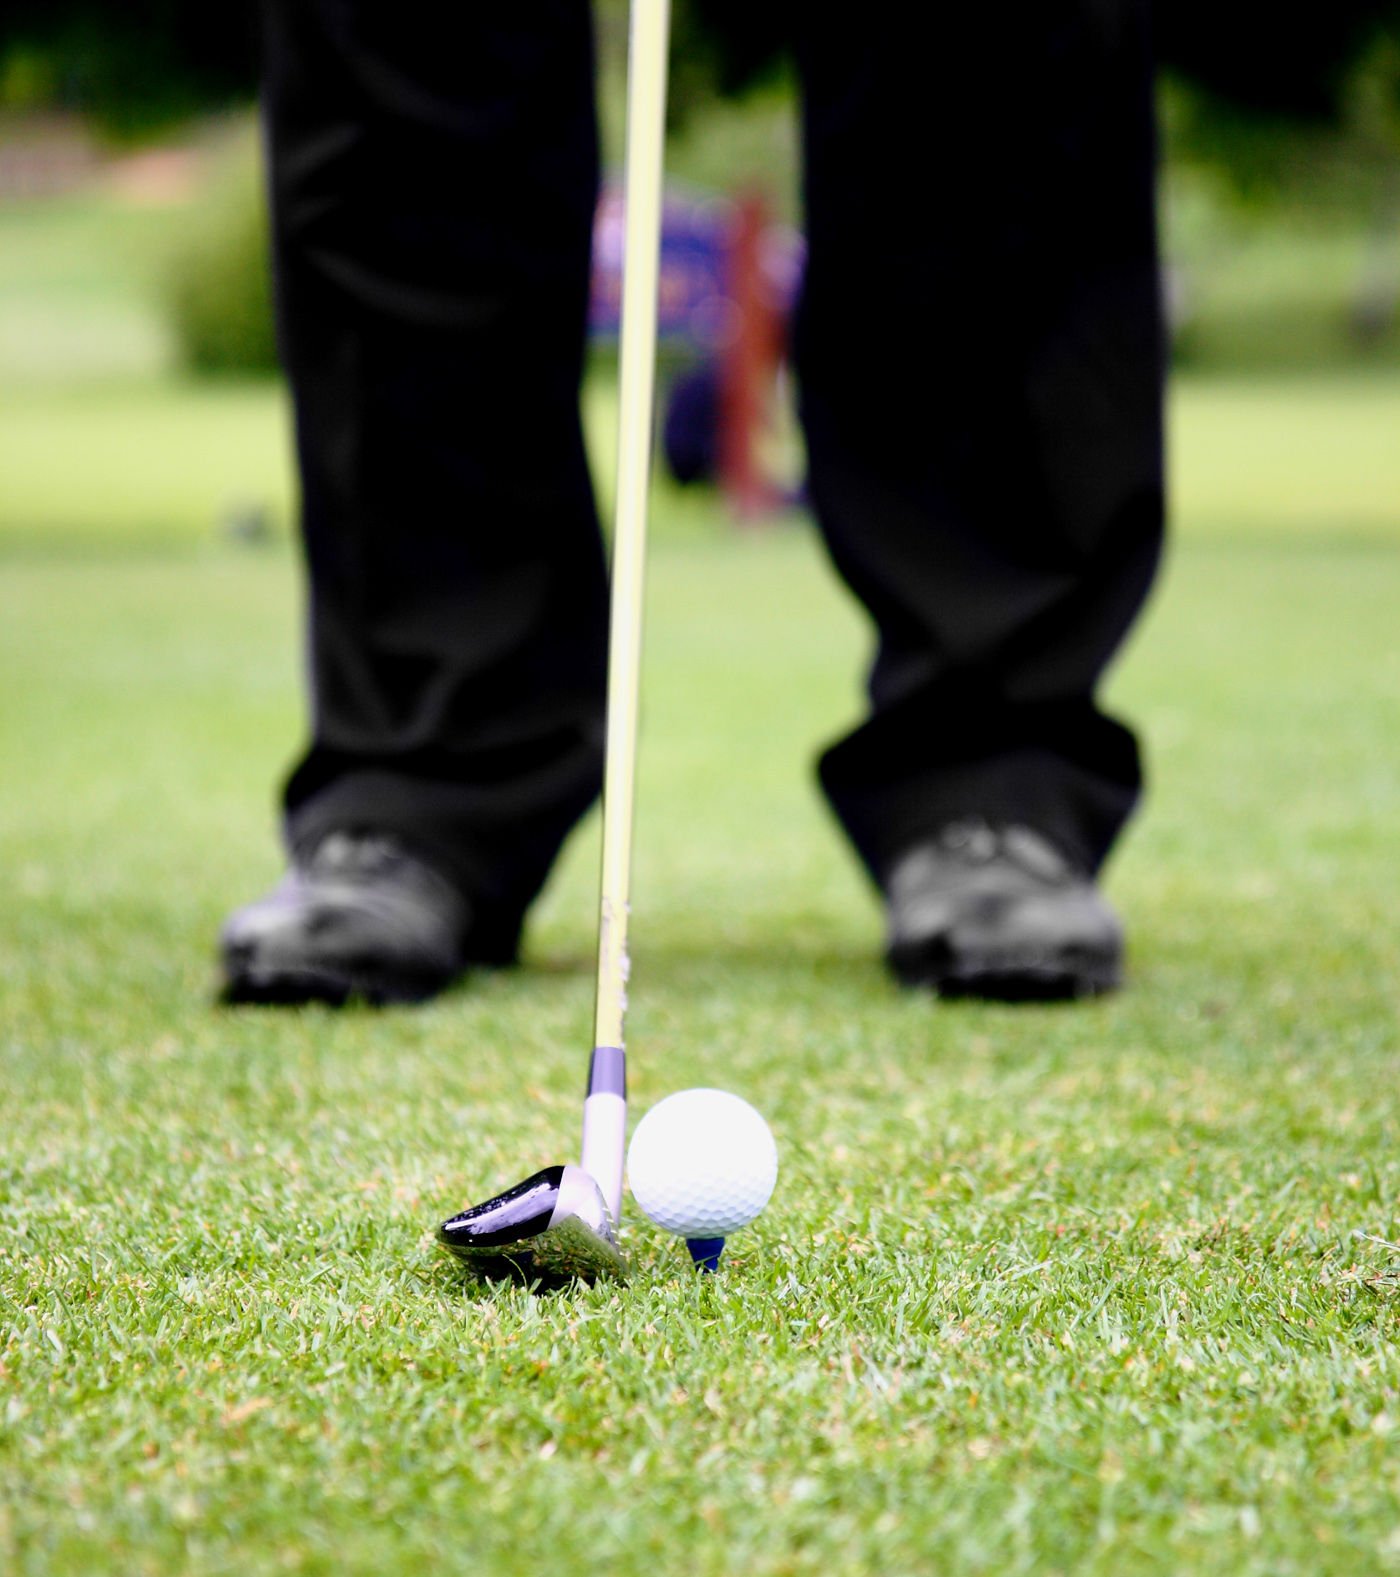 Teeing Off On A Golf Course, Aim, Ready, Outdoor, Outside, HQ Photo